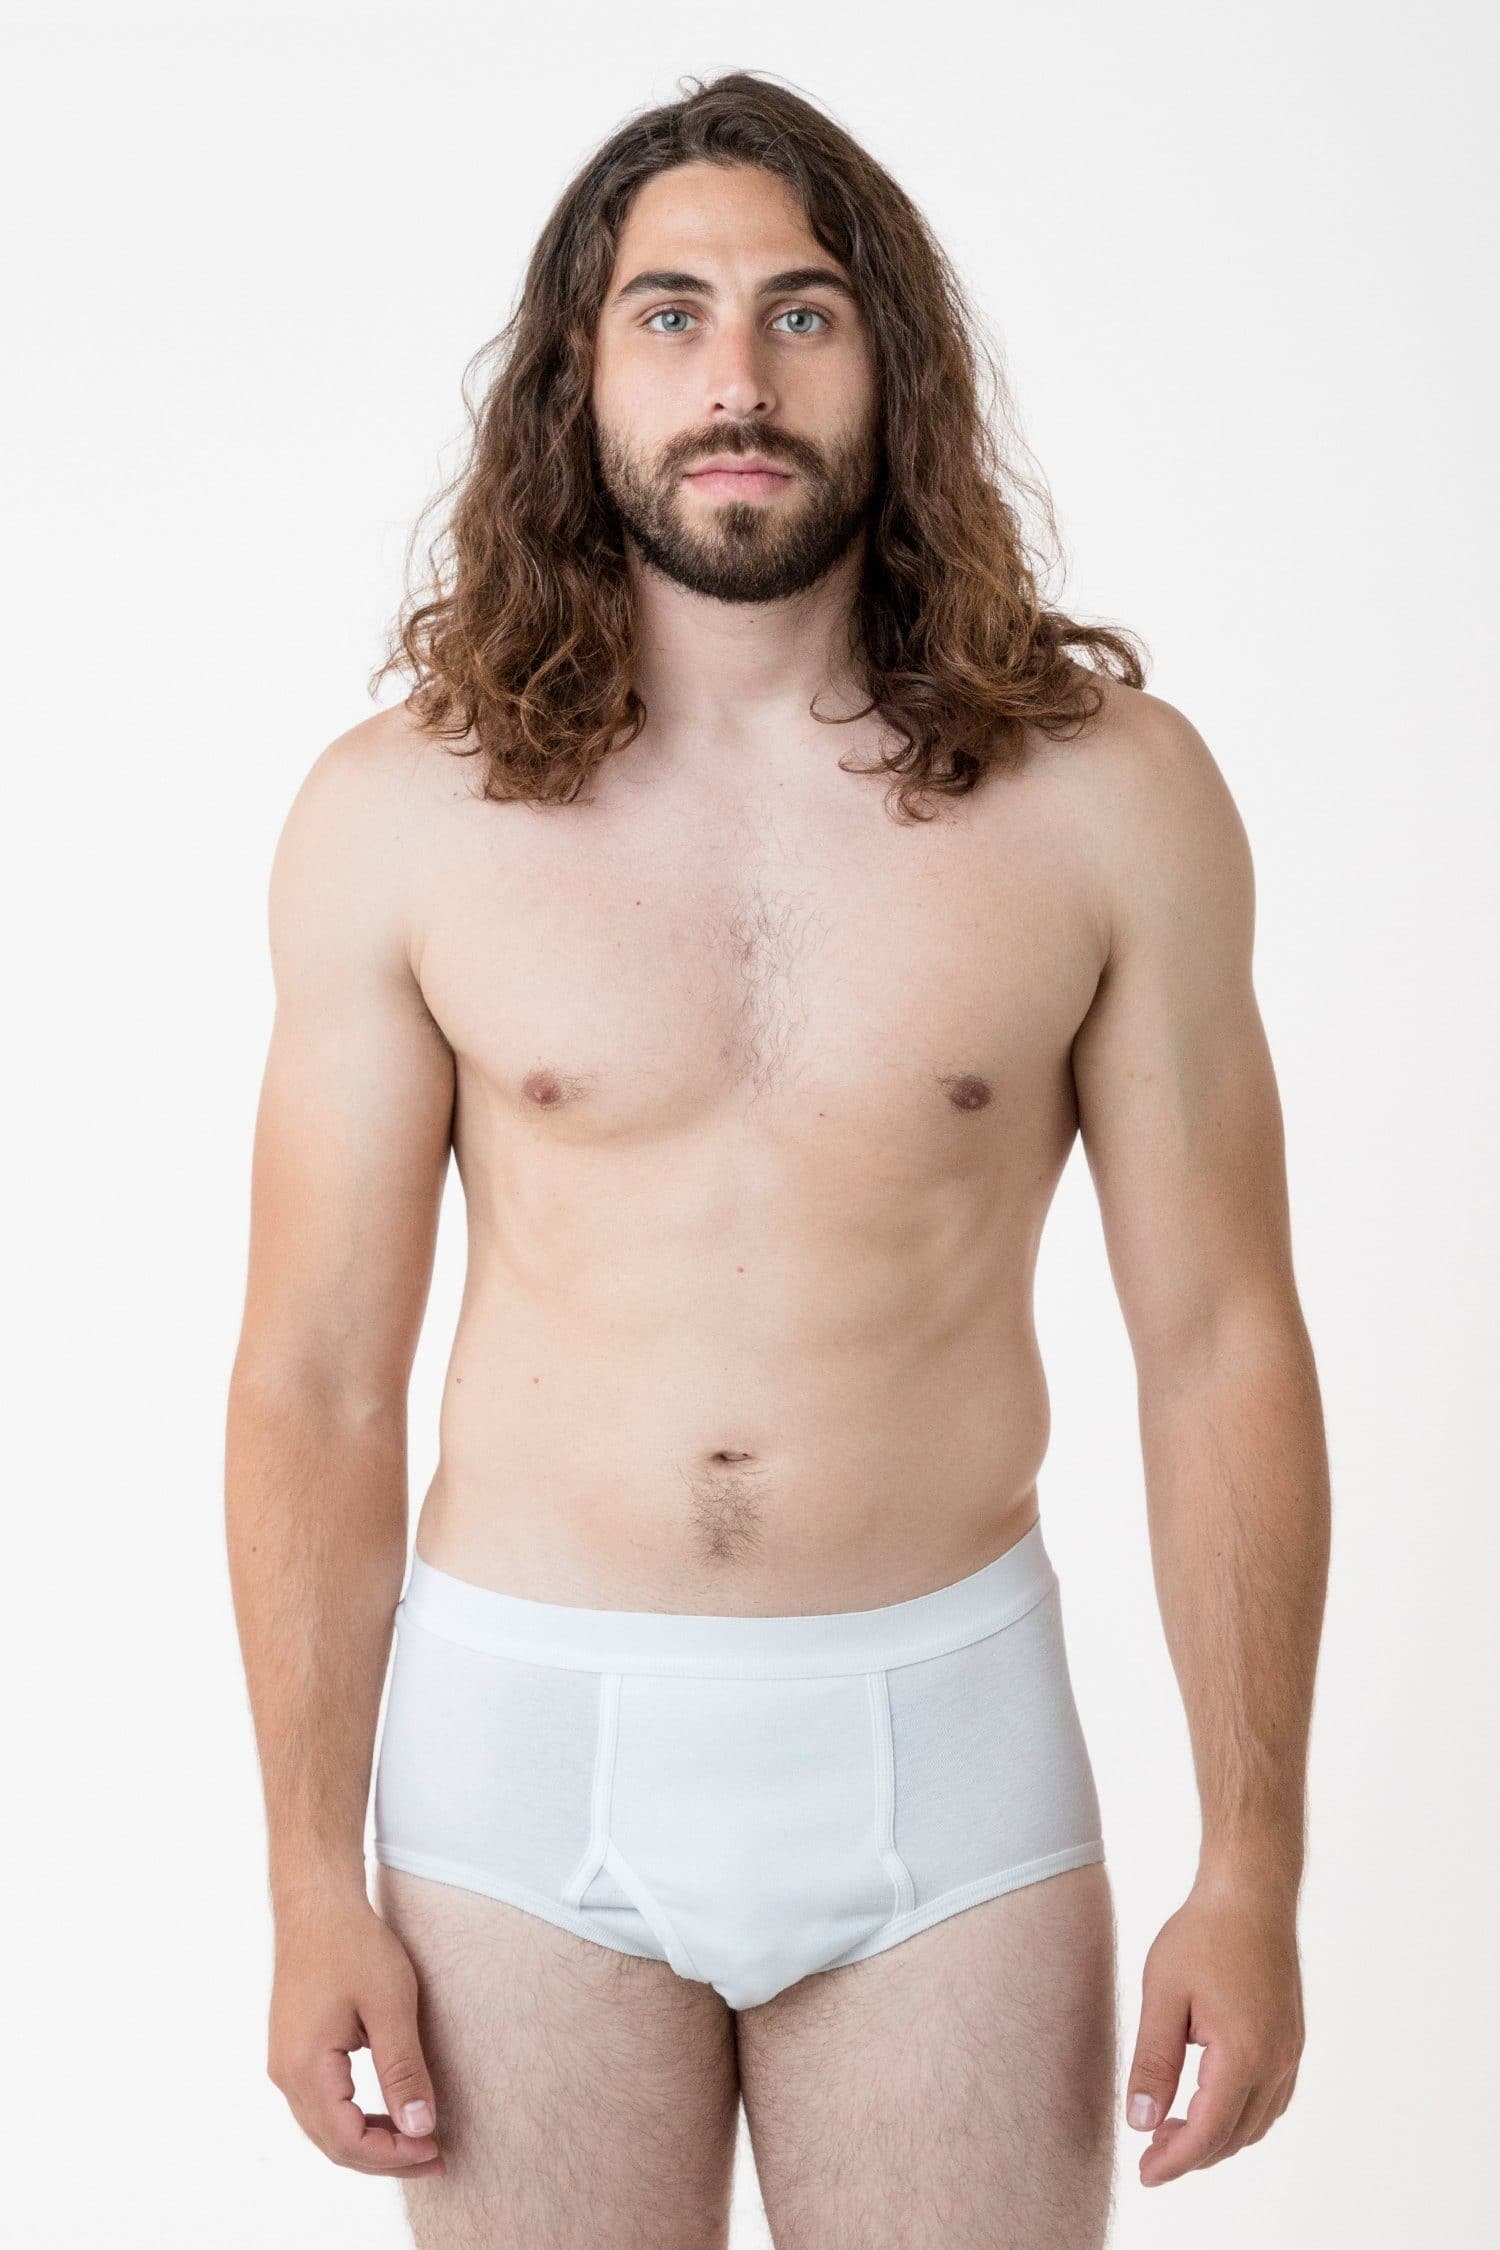 RibbedTee G3 Boxer Briefs Wedgie, Get Your Groove Back